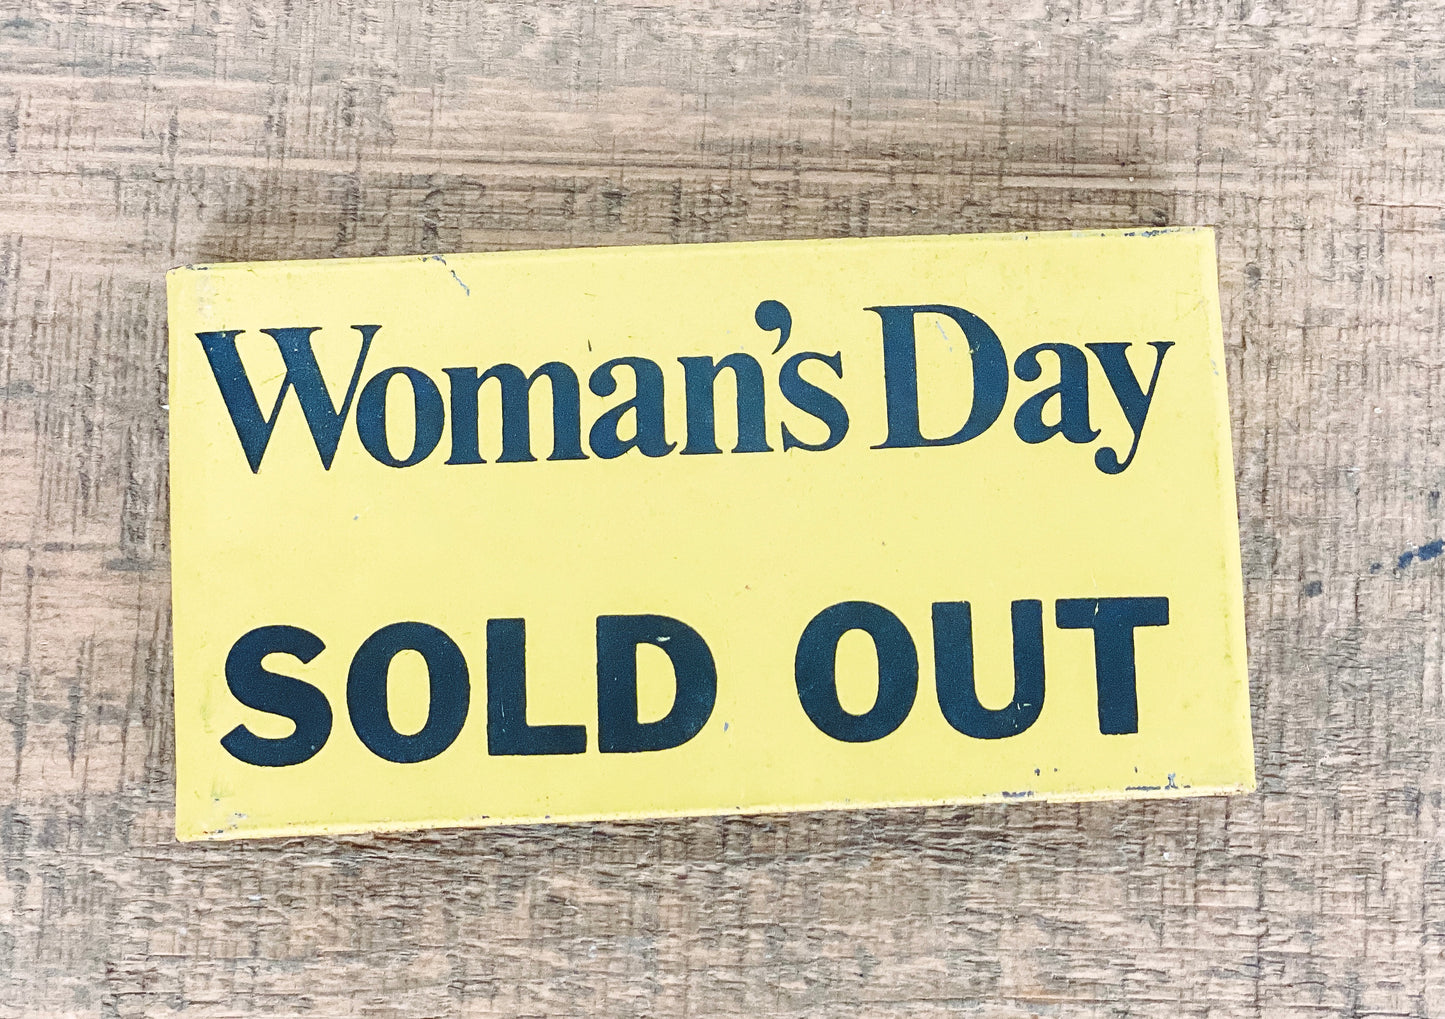 Vintage Metal Woman's Day 'Sold Out' Placard